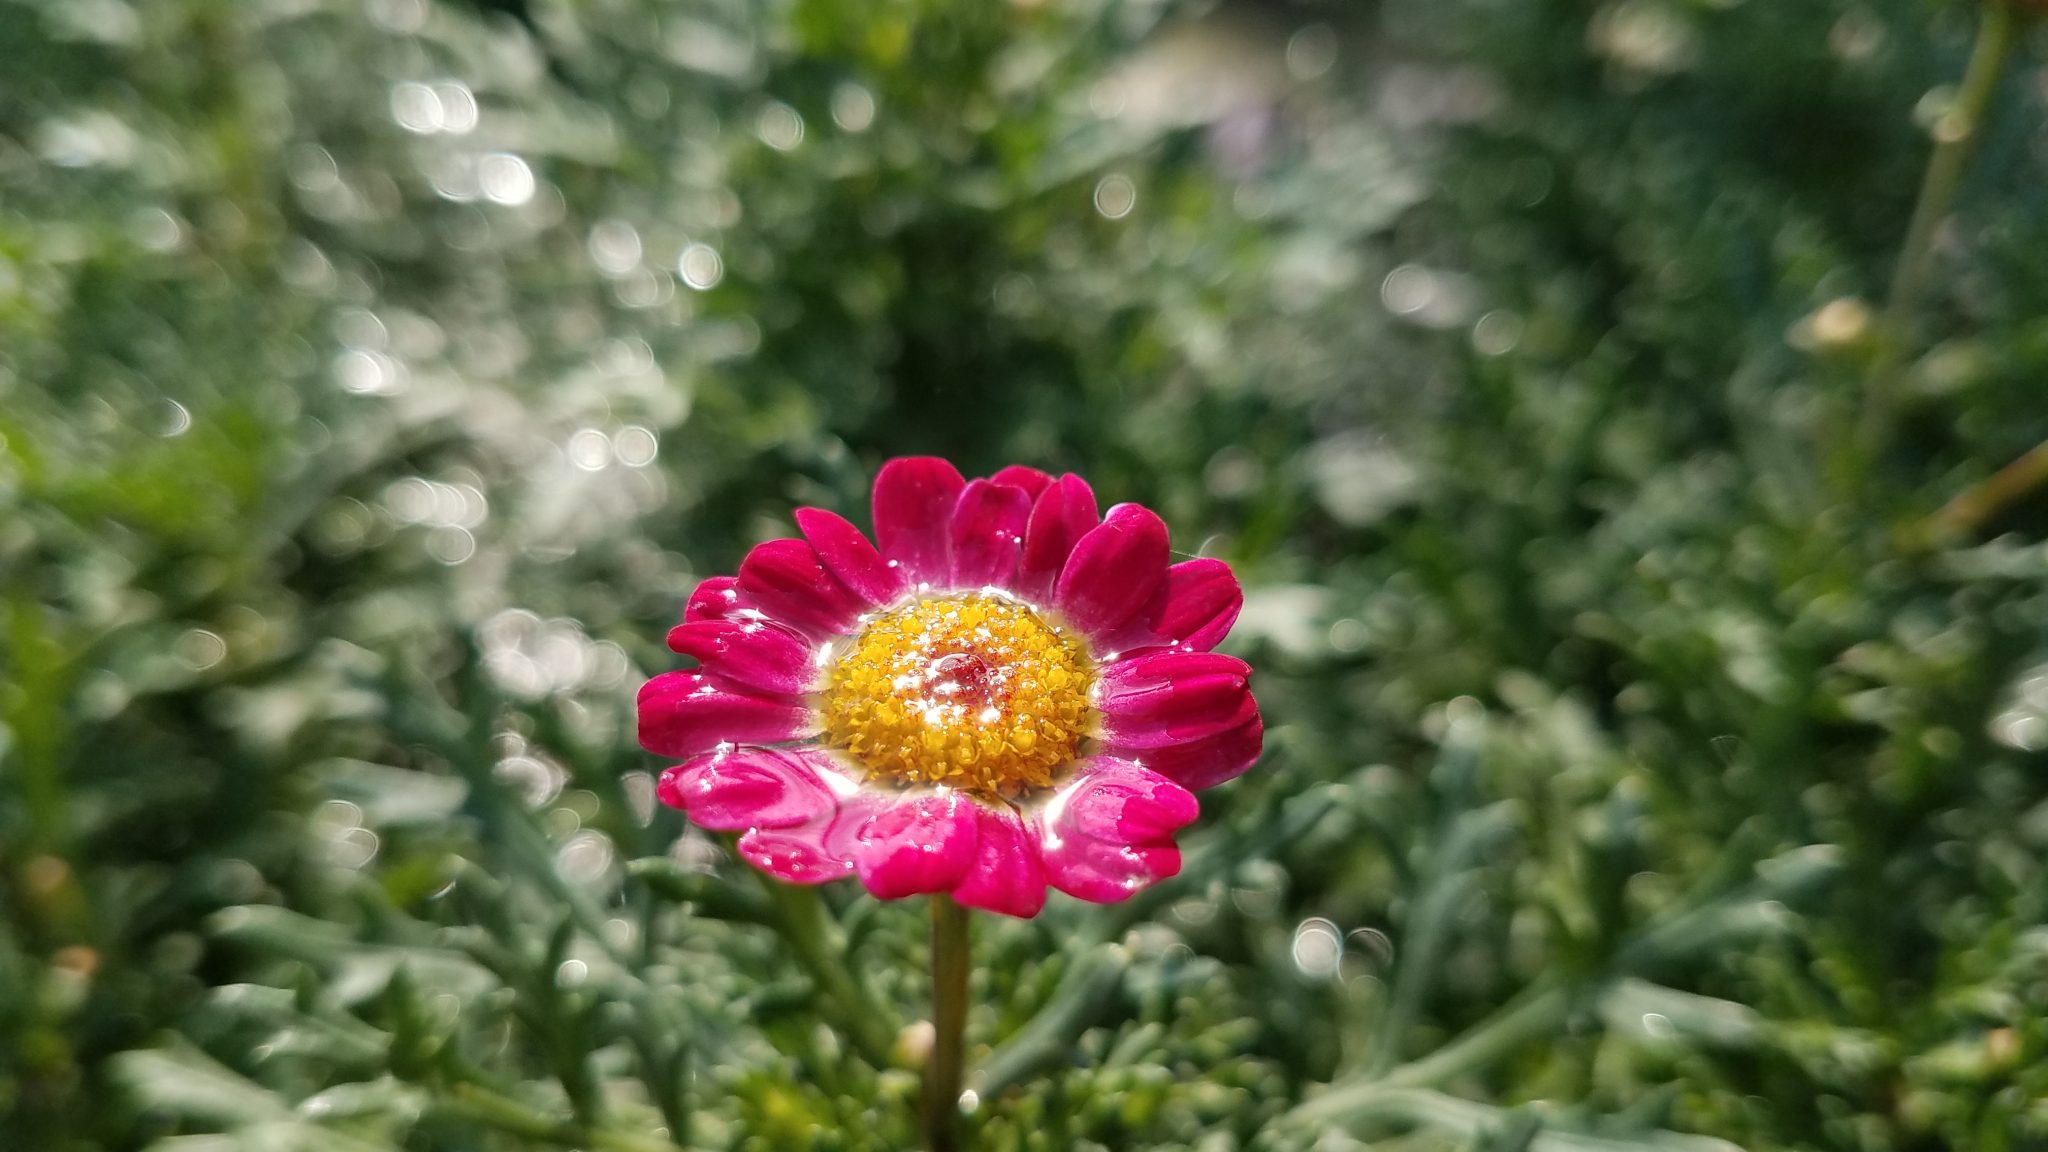 Water on an English Daisy